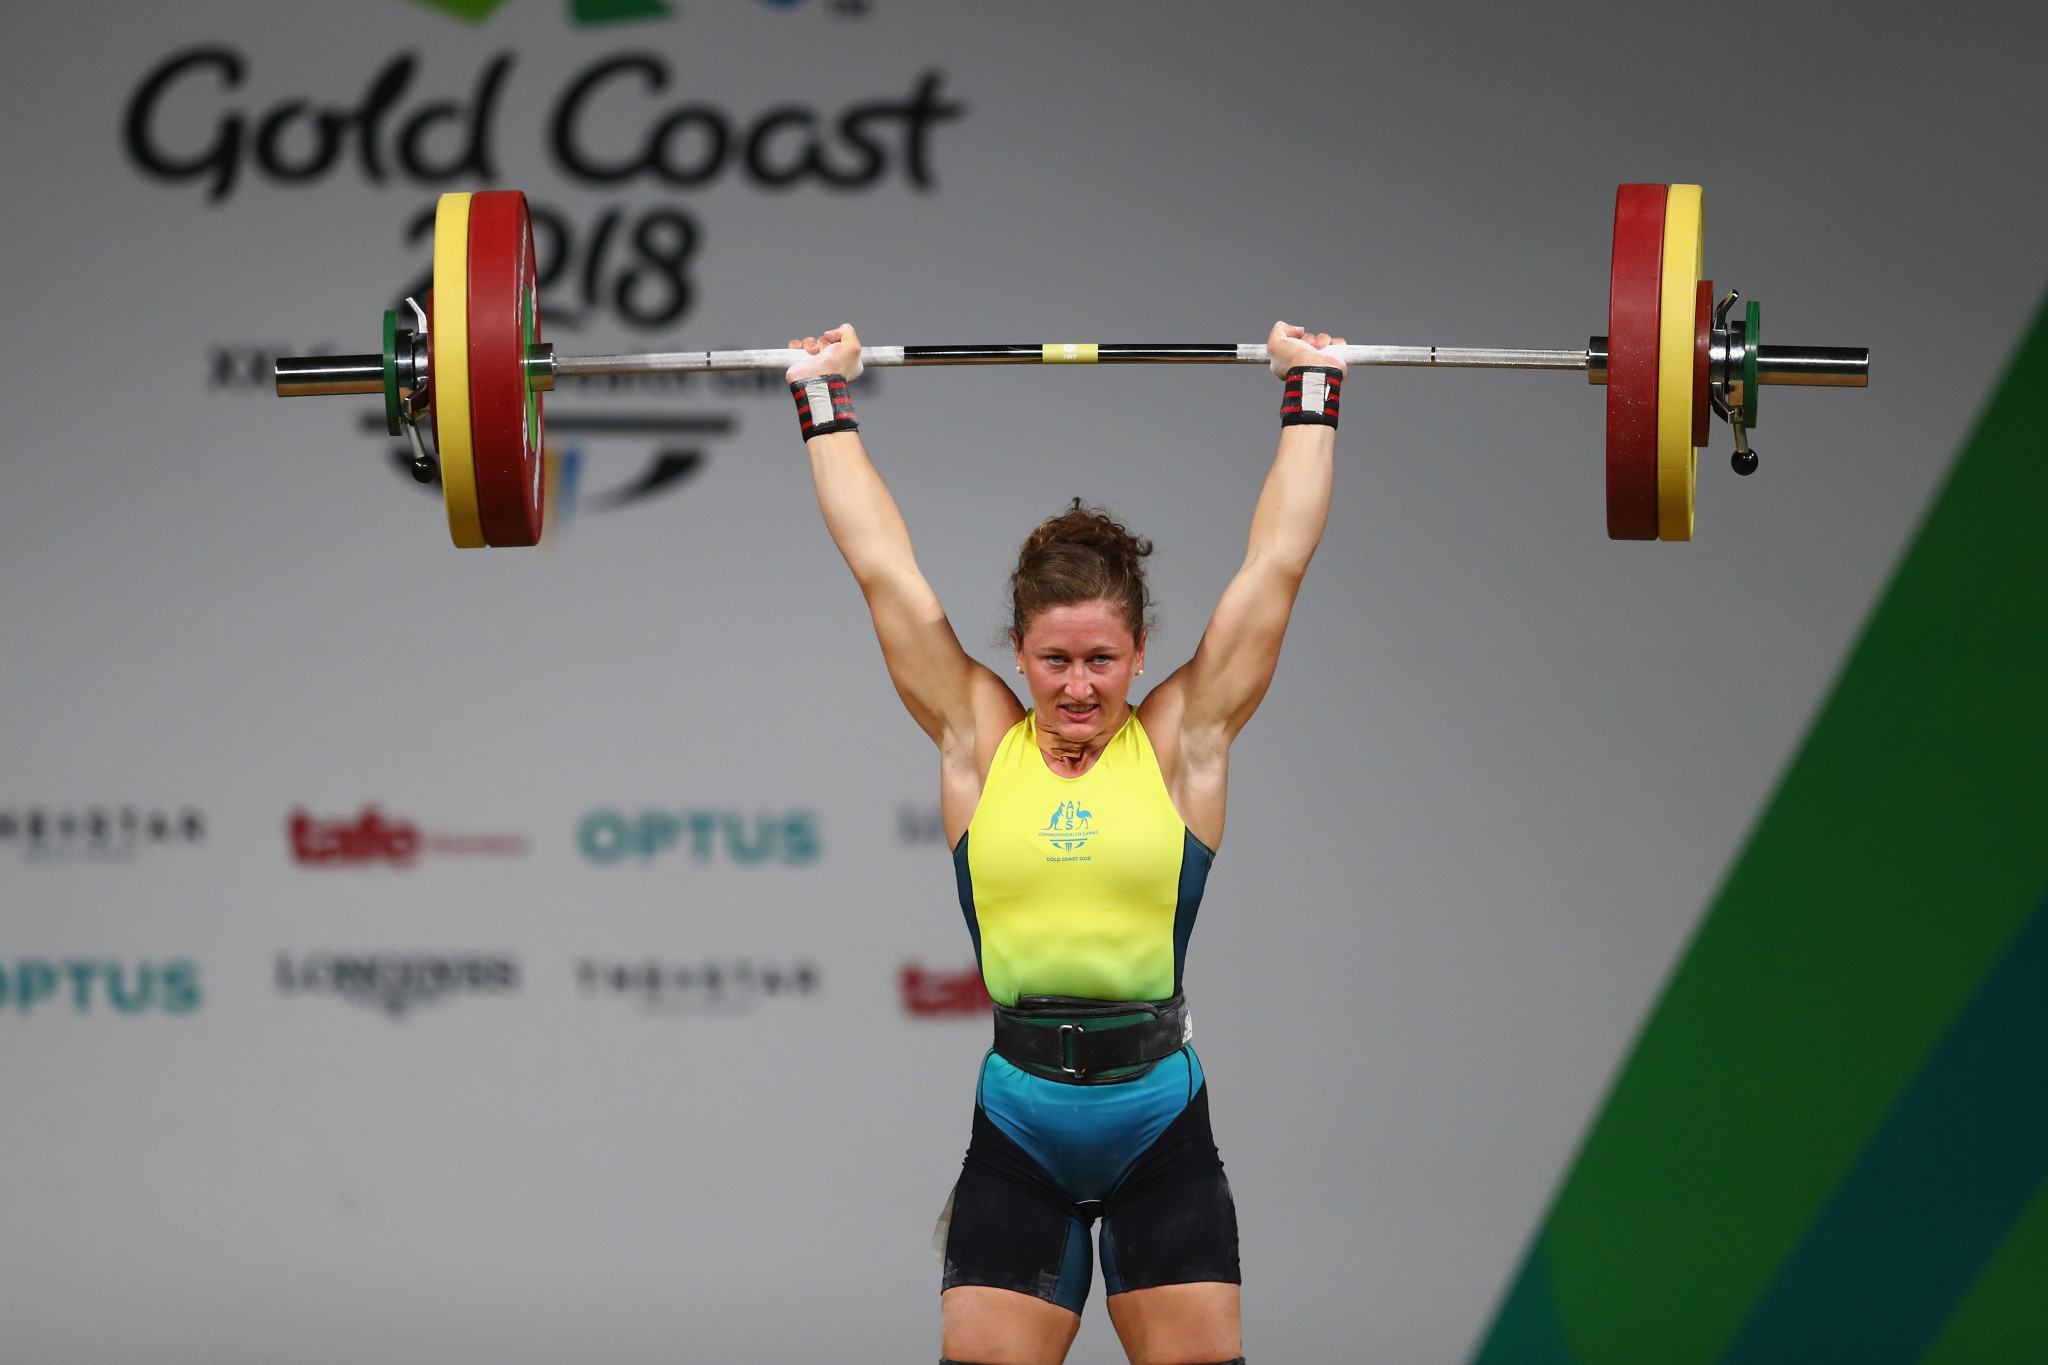 There was also success for Australia in weightlifting as Tia-Clair Toomey secured the women's 58 kilograms gold medal ©Getty Images